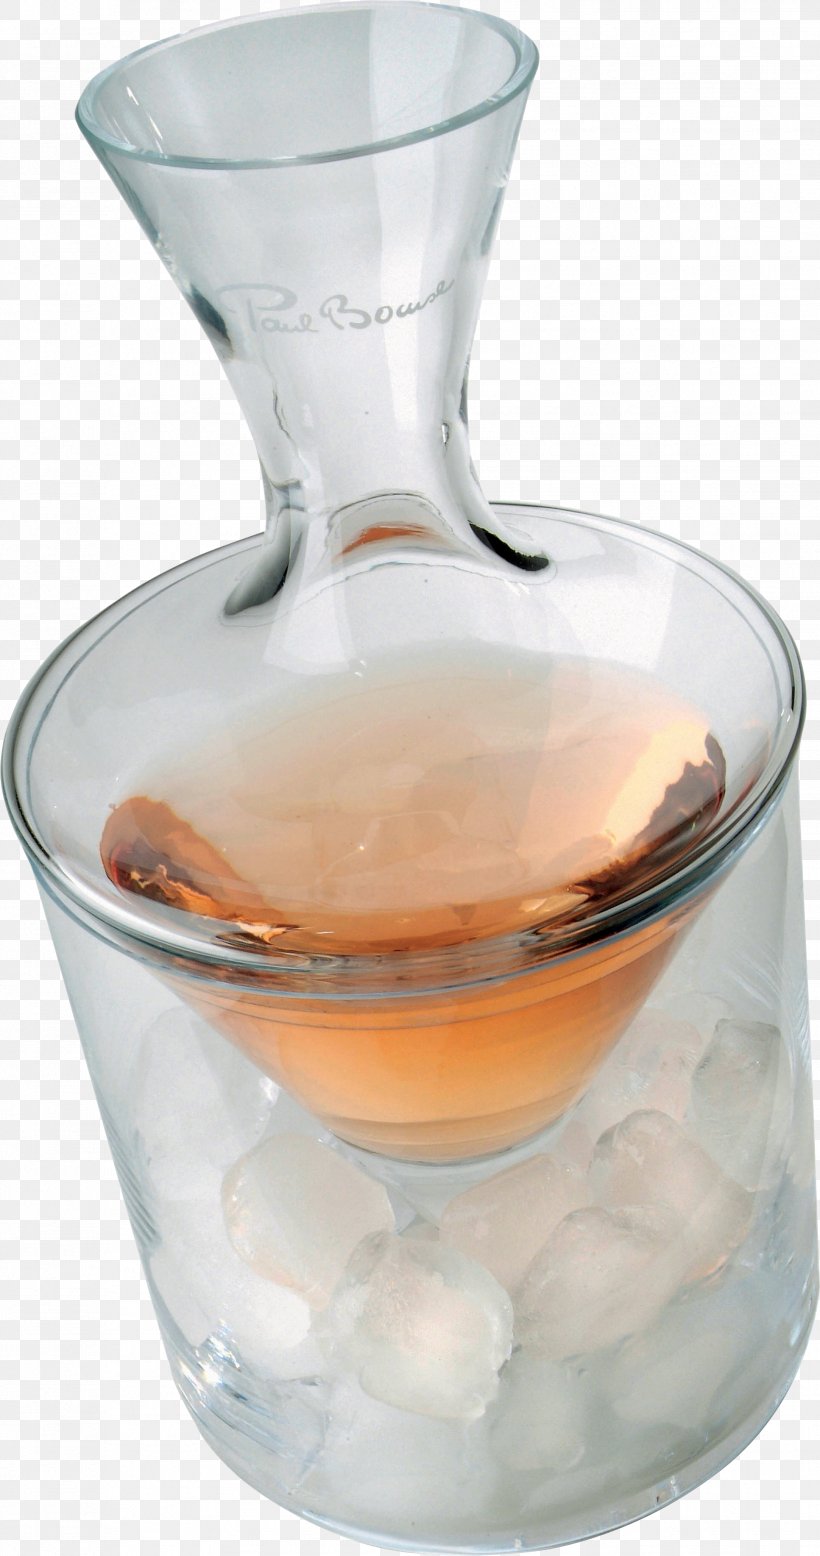 Decanter Carafe Glass Alcoholic Drink Decantation, PNG, 1934x3672px, Decanter, Alcoholic Drink, Alcoholism, Barware, Carafe Download Free